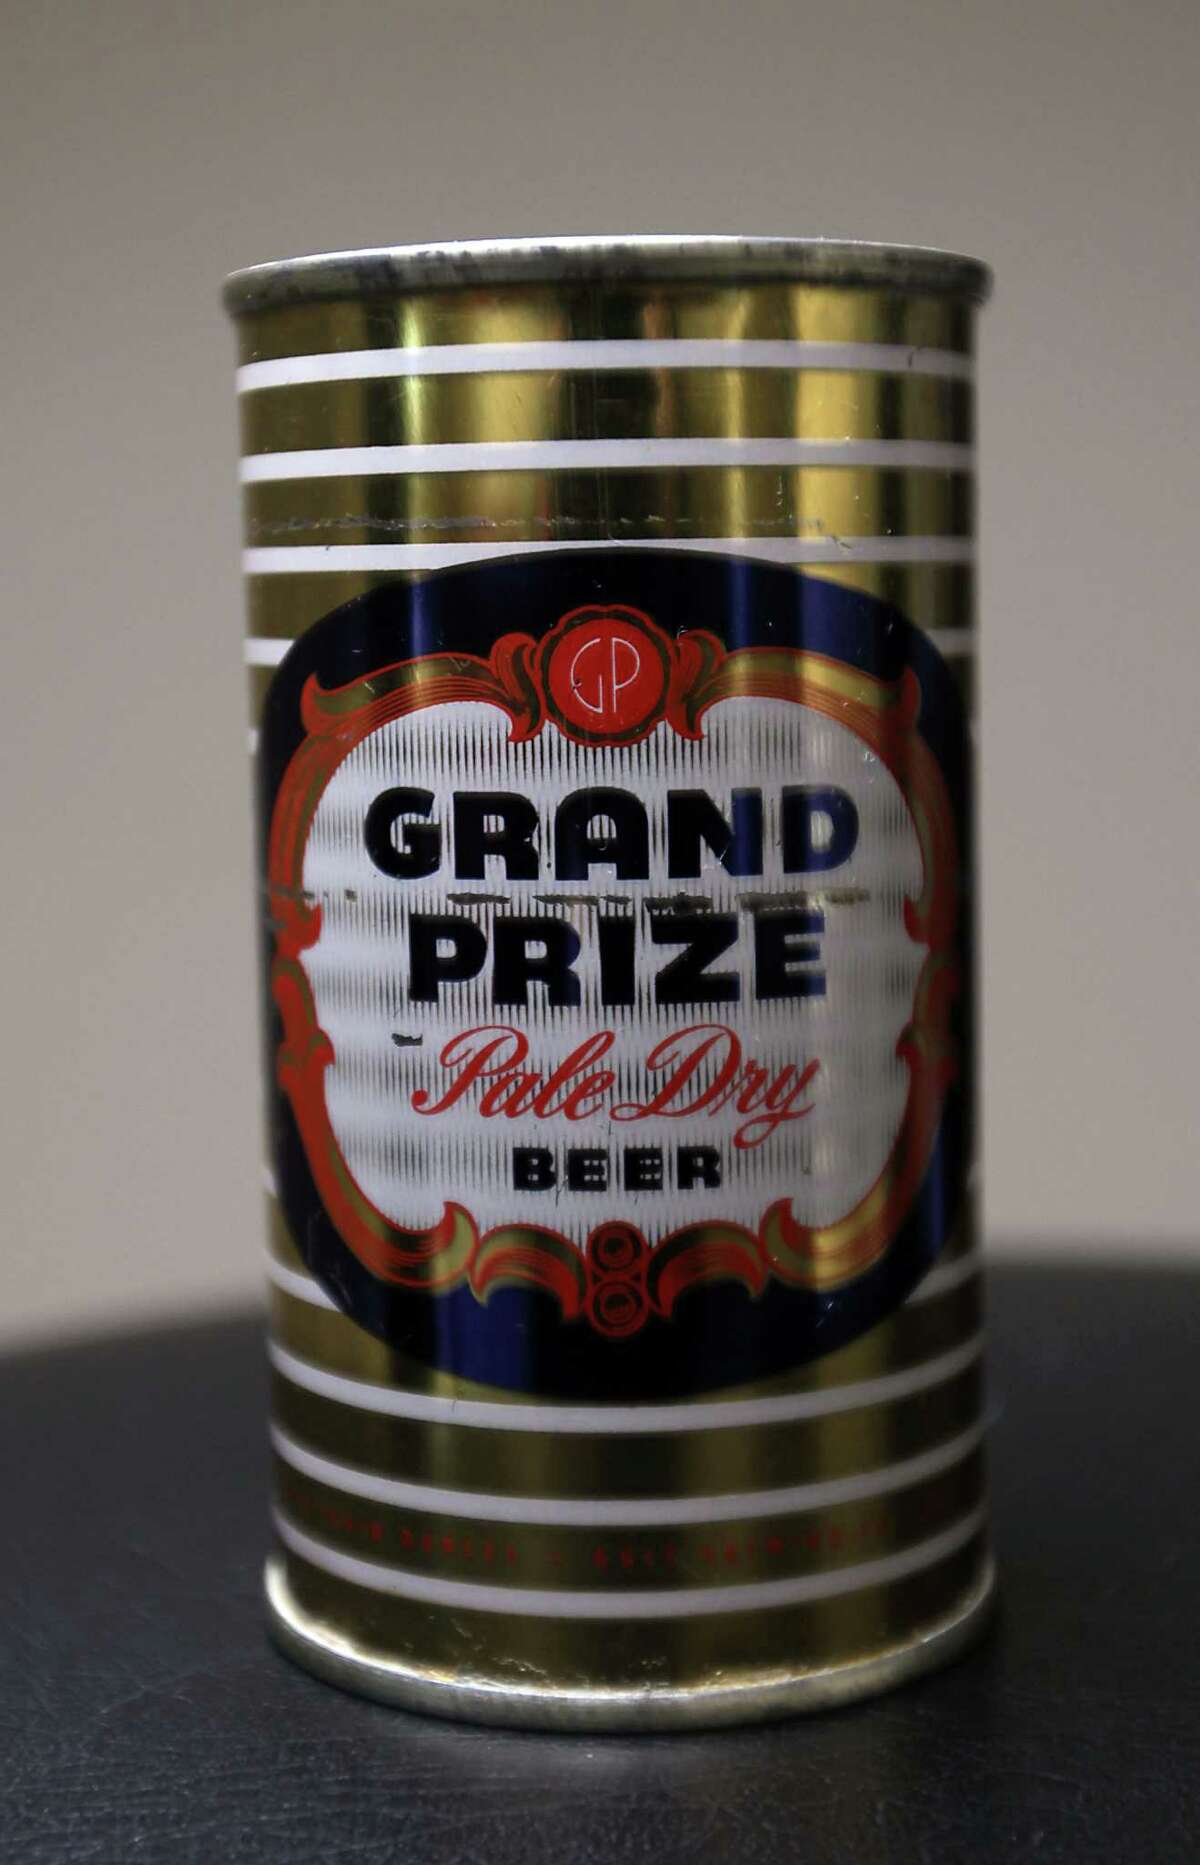 A can of Grand Prize beer which is part of Ken Knisely's beer can and beer memorabilia collection Wednesday, Nov. 27, 2013, in Houston. ( James Nielsen / Houston Chronicle )